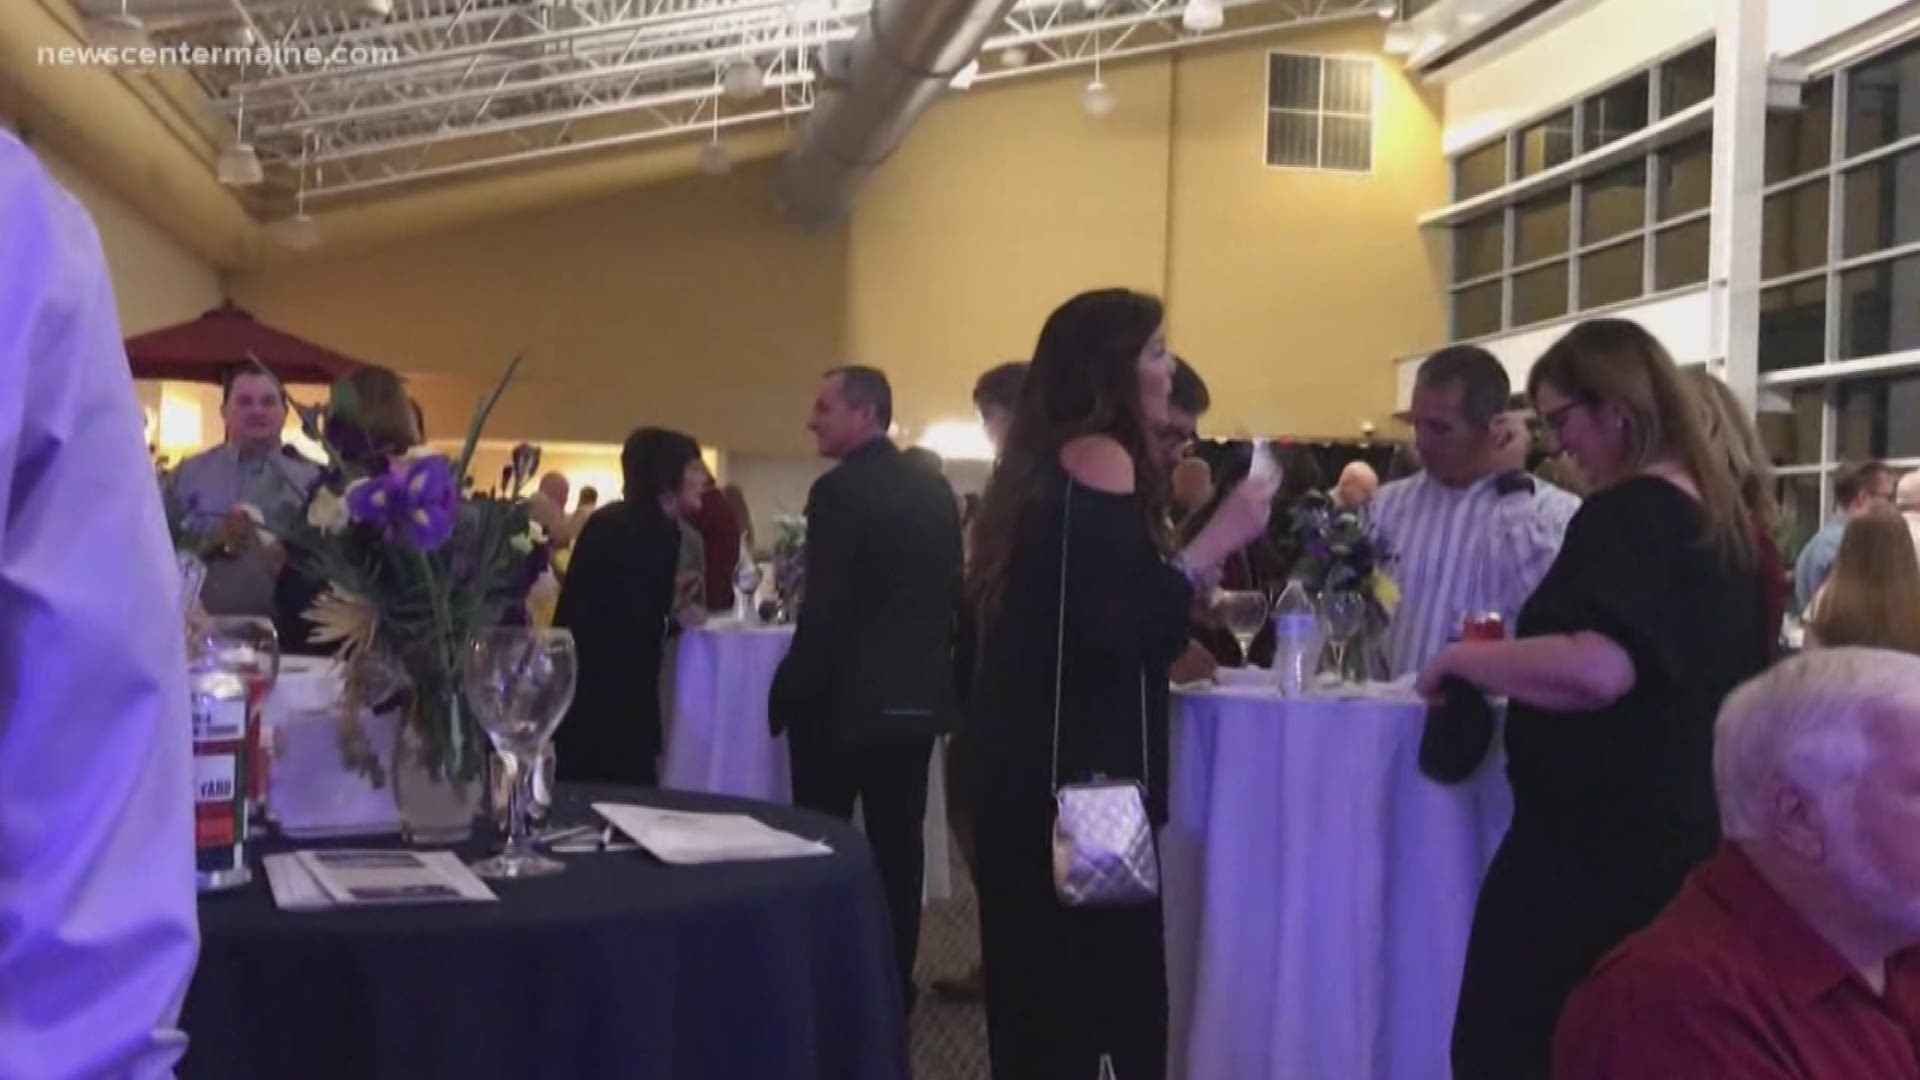 The Cystic Fibrosis Foundation New England Chapter hosted its annual Take a Breath Social fundraiser. This year's honoree was Pamela Sirois. Sirois has CF and is in her forties. In 2016, she underwent a bilateral lung transplant. She accepted an award wit